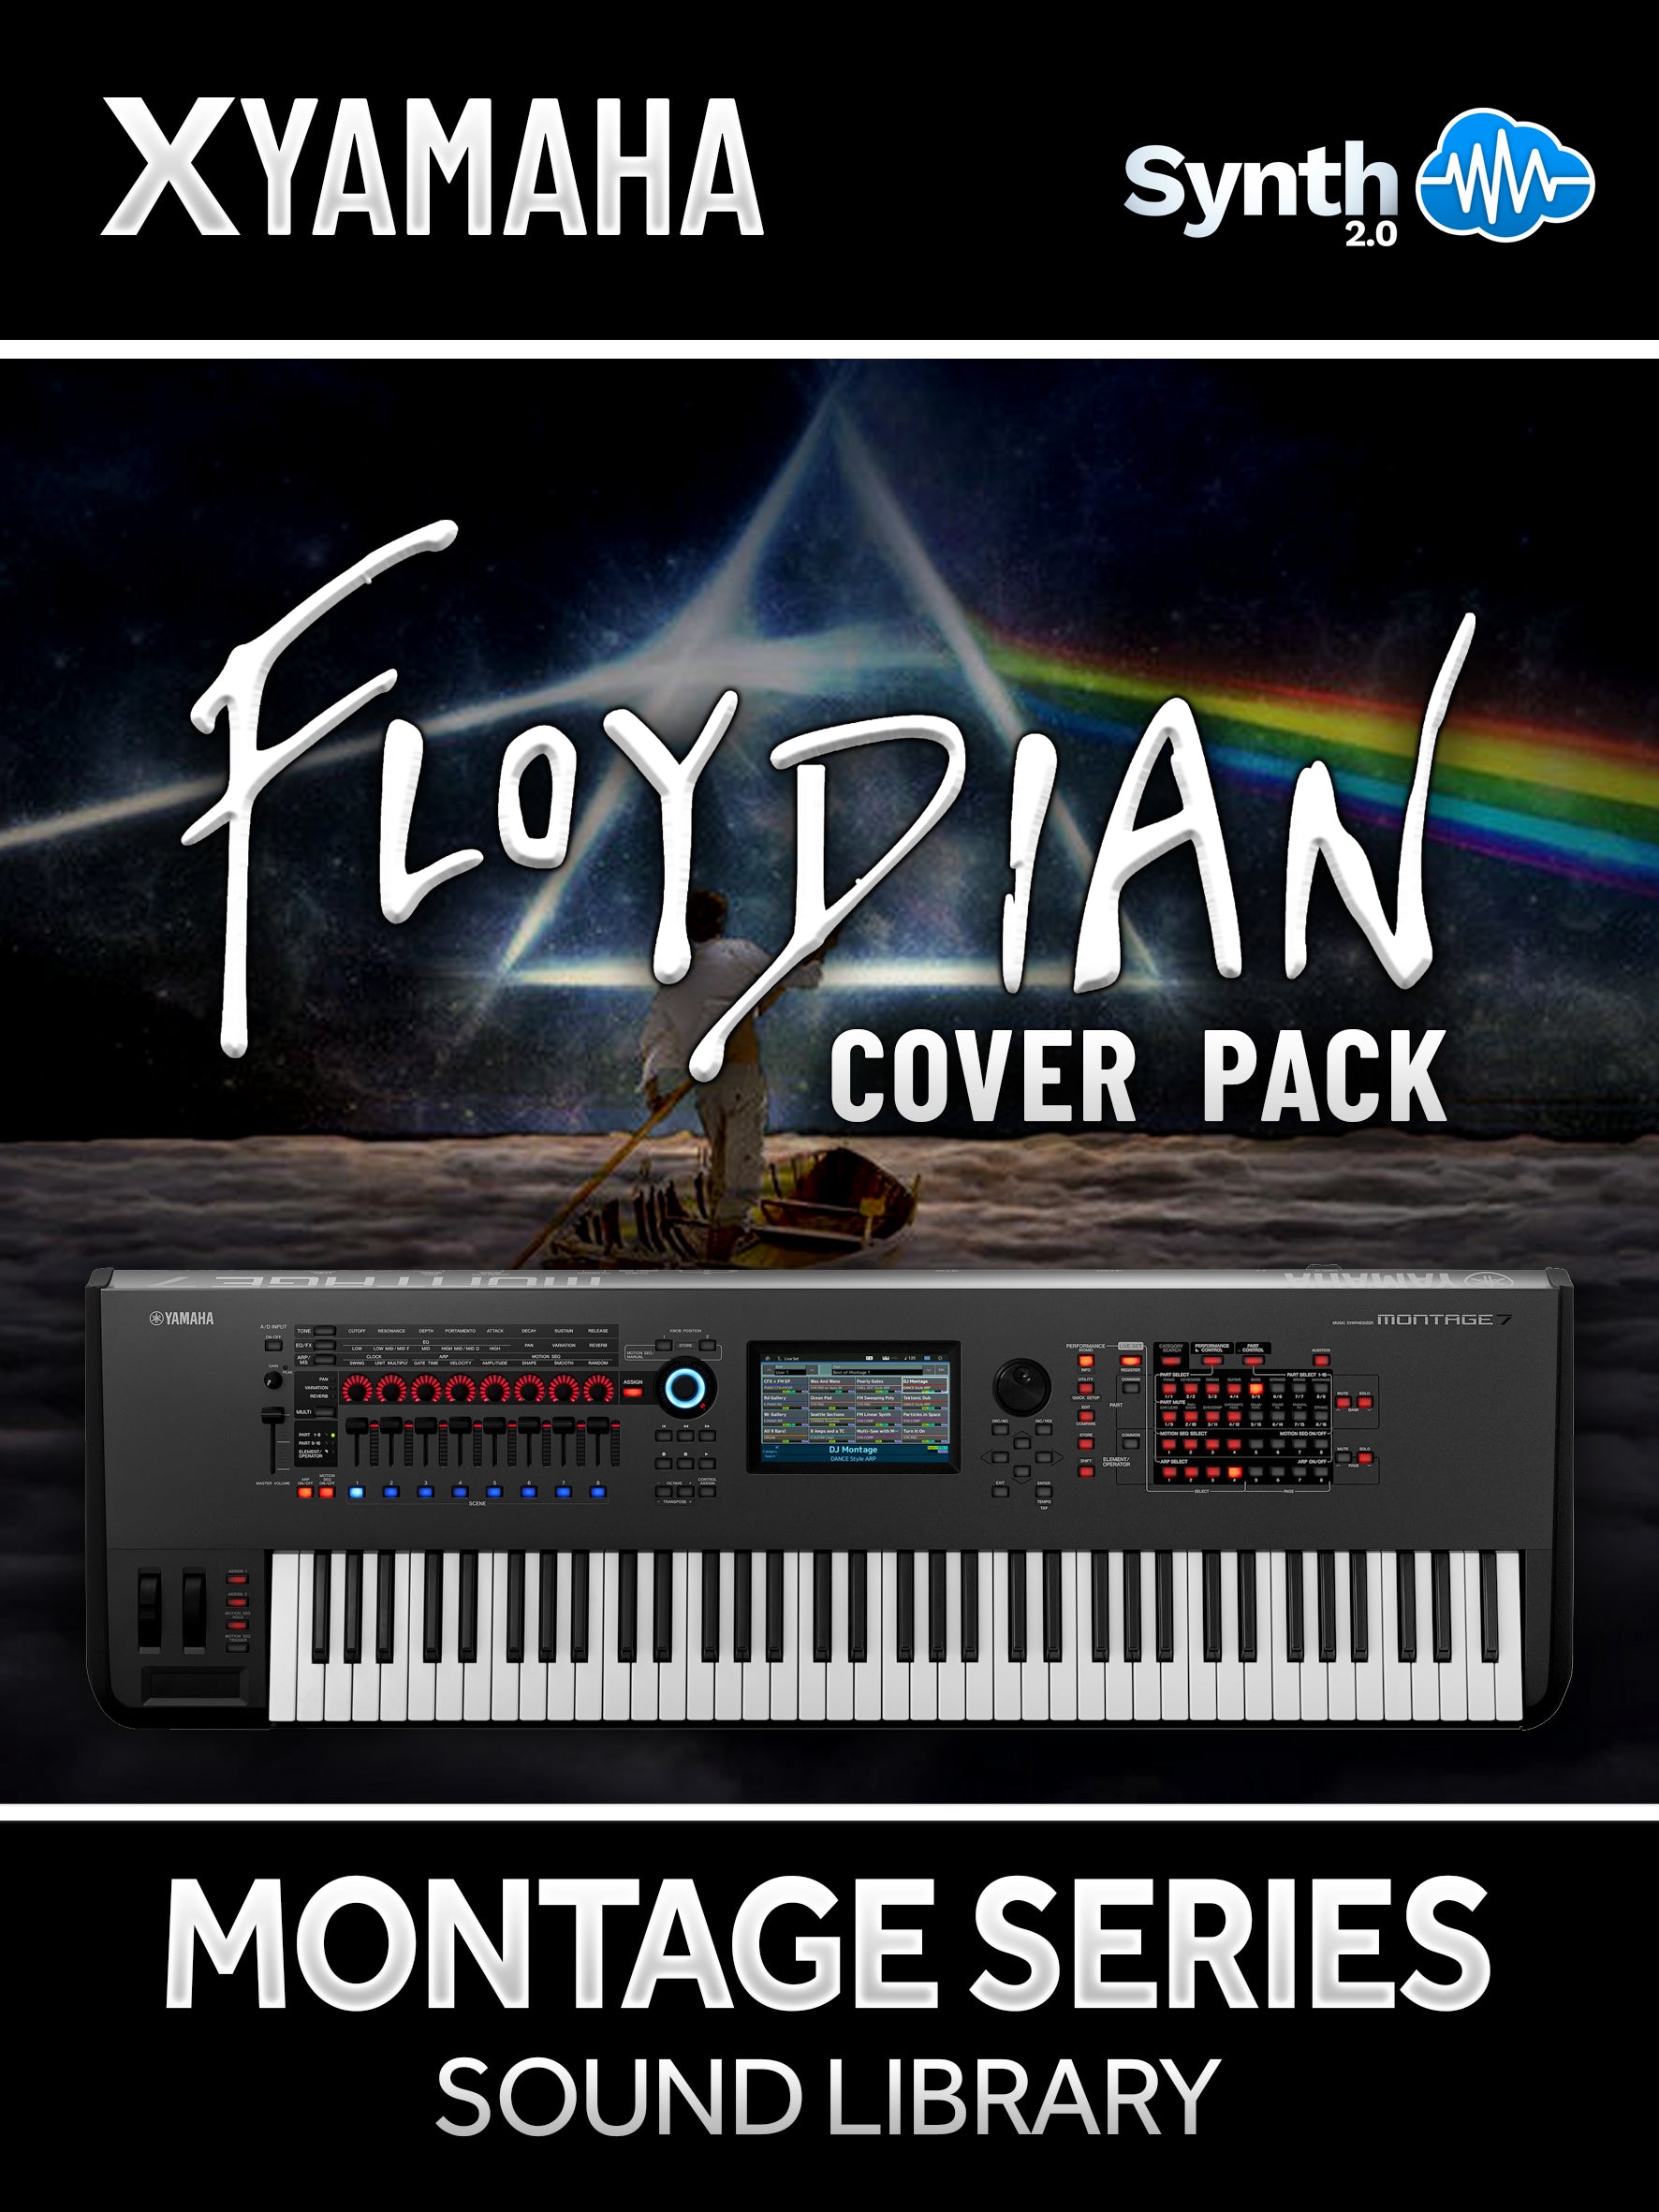 SCL342 - ( Bundle ) - Floydian Cover Pack + PF Cover Pack V3 - Yamaha MONTAGE / M